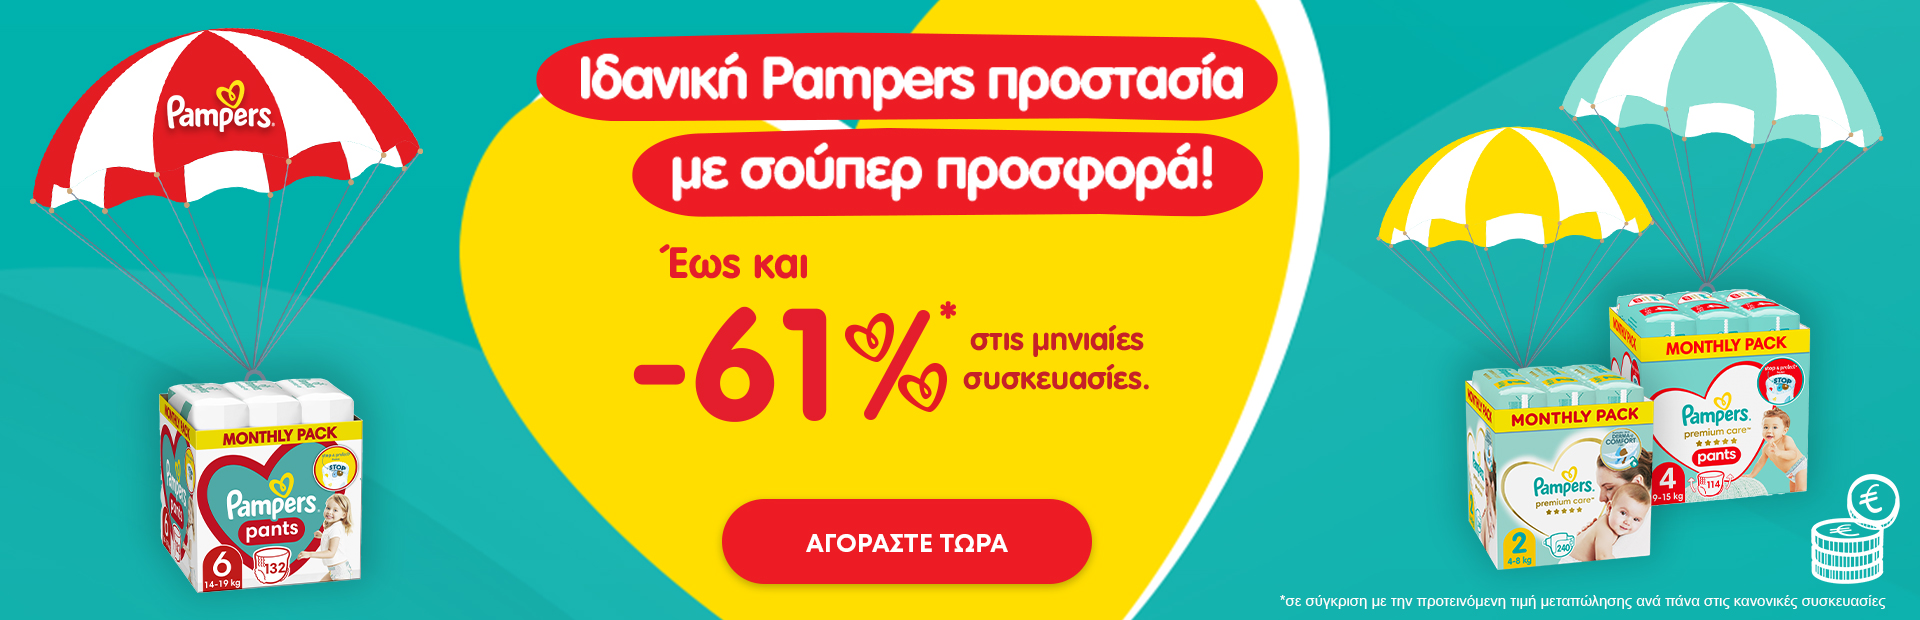 Pampers monthly promo